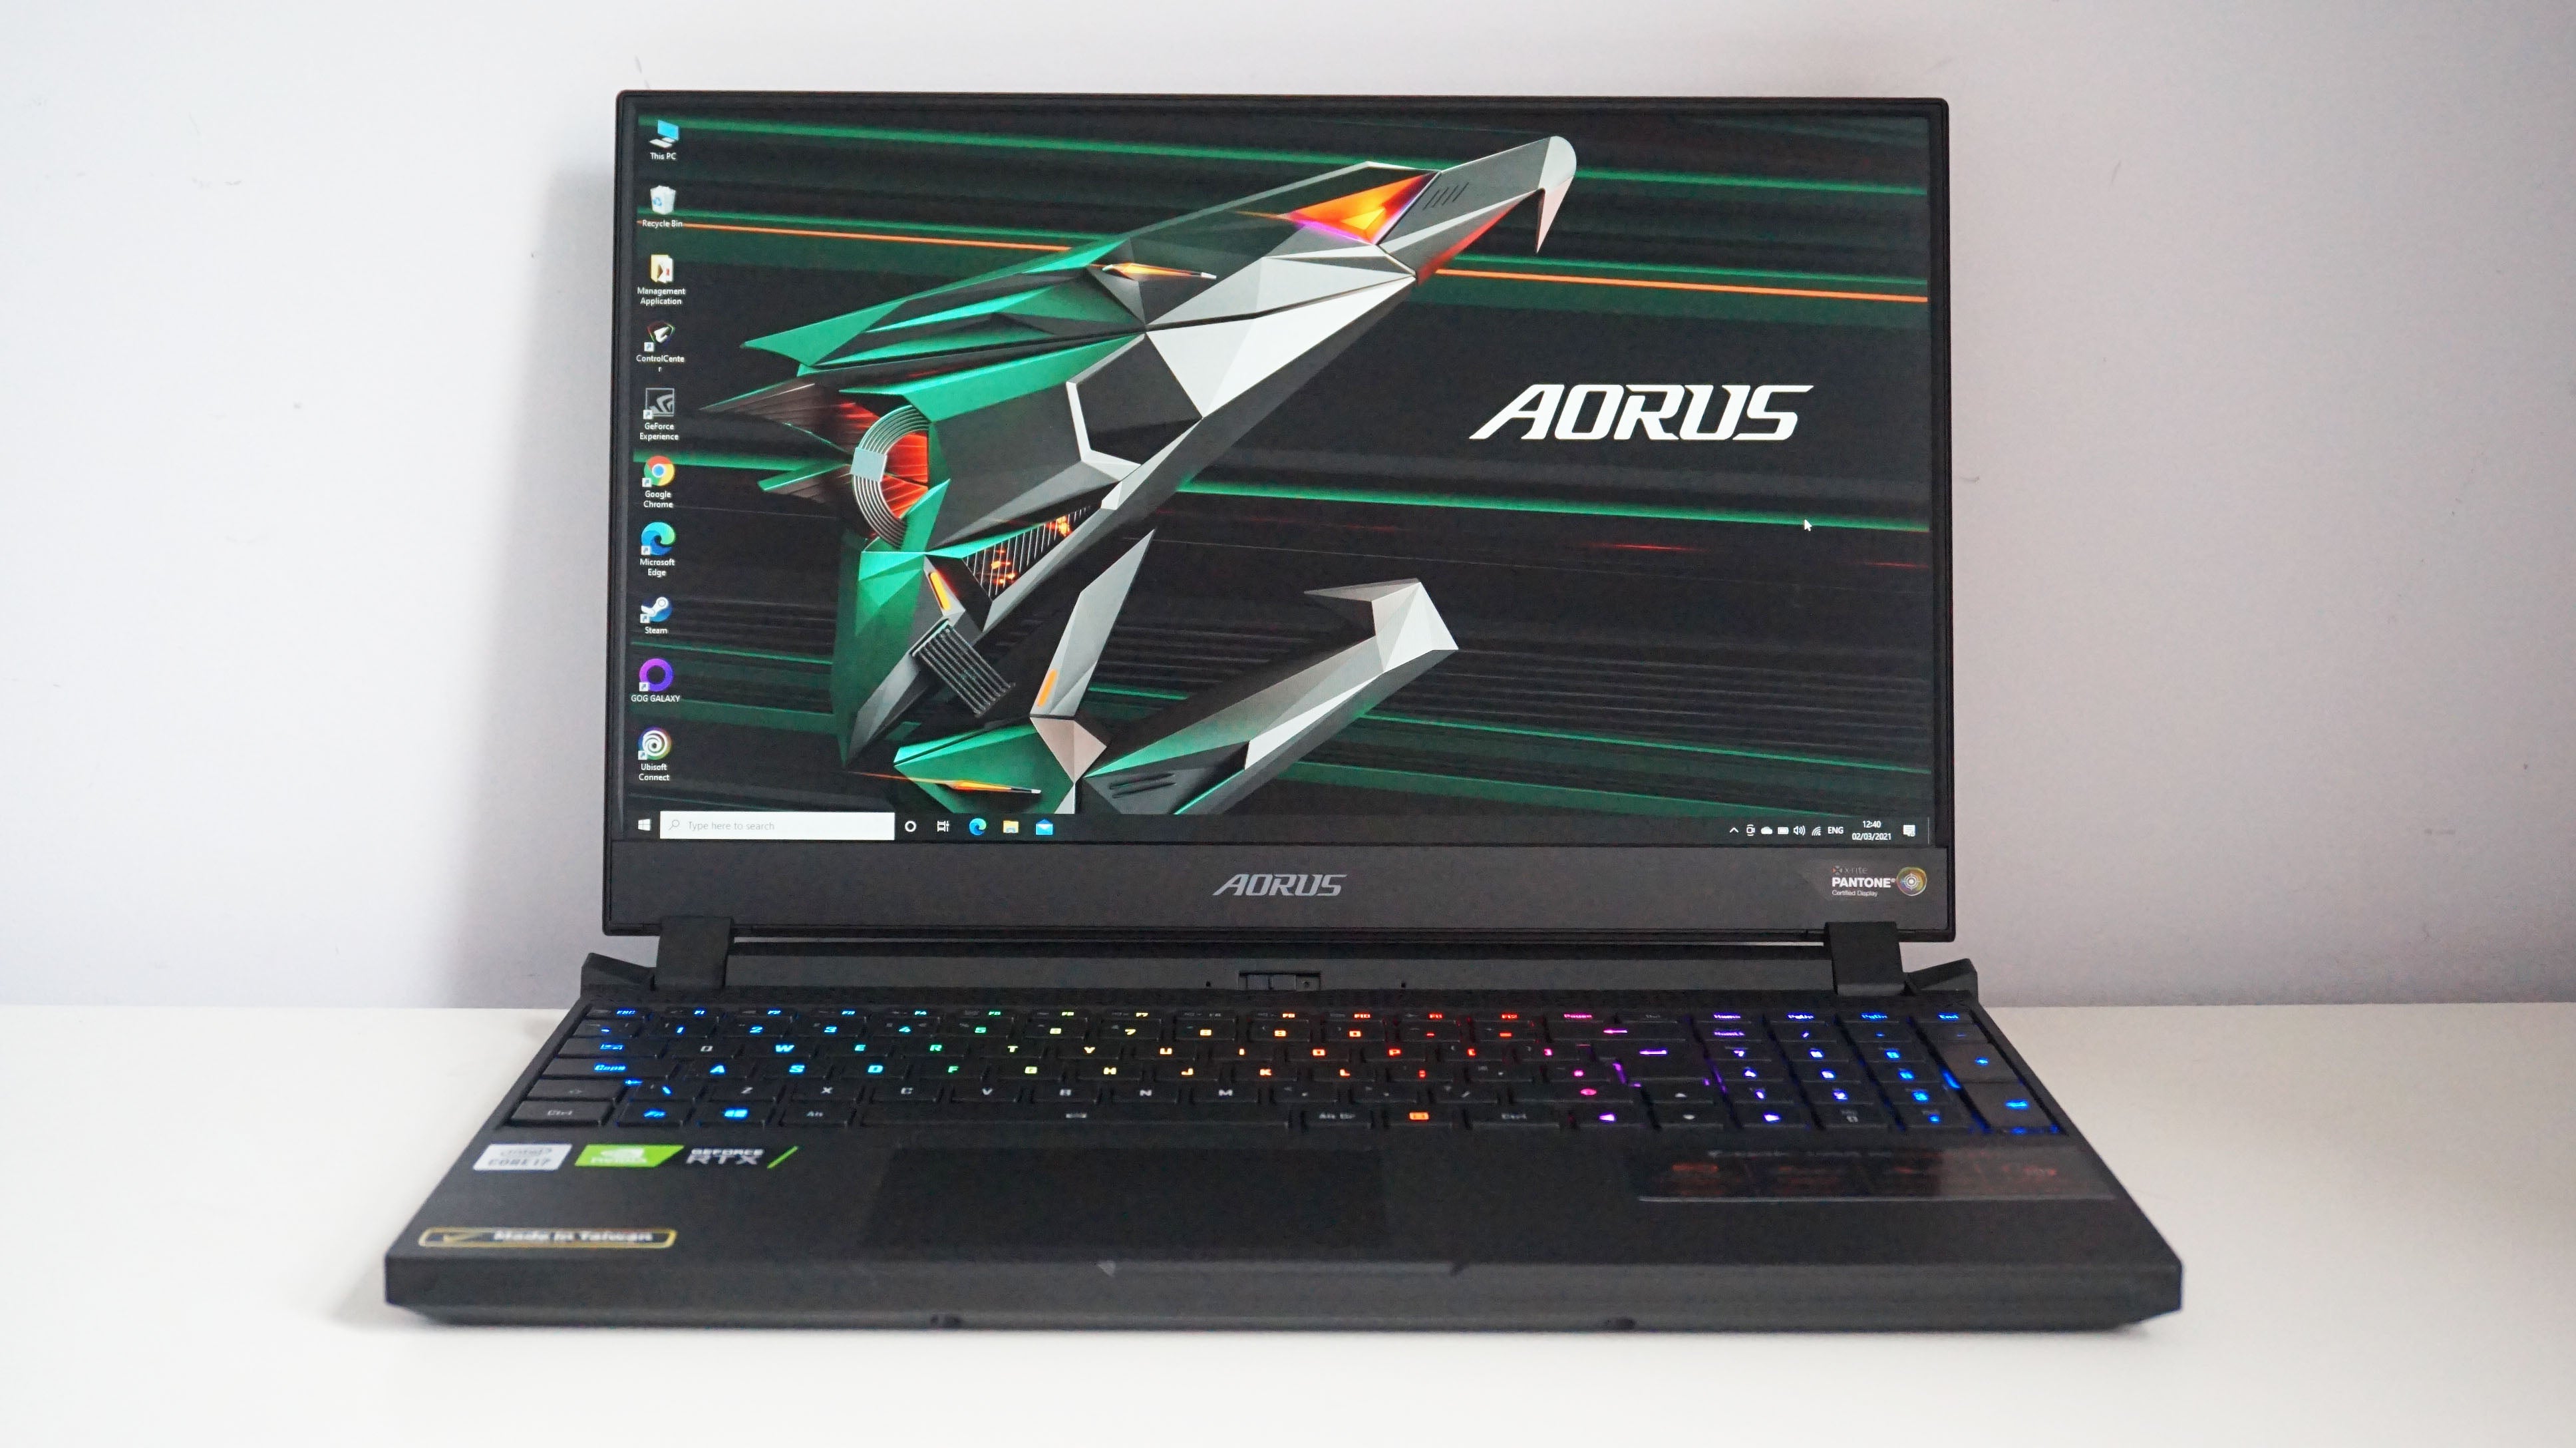 A photo of the Gigabyte Aorus 15G gaming laptop